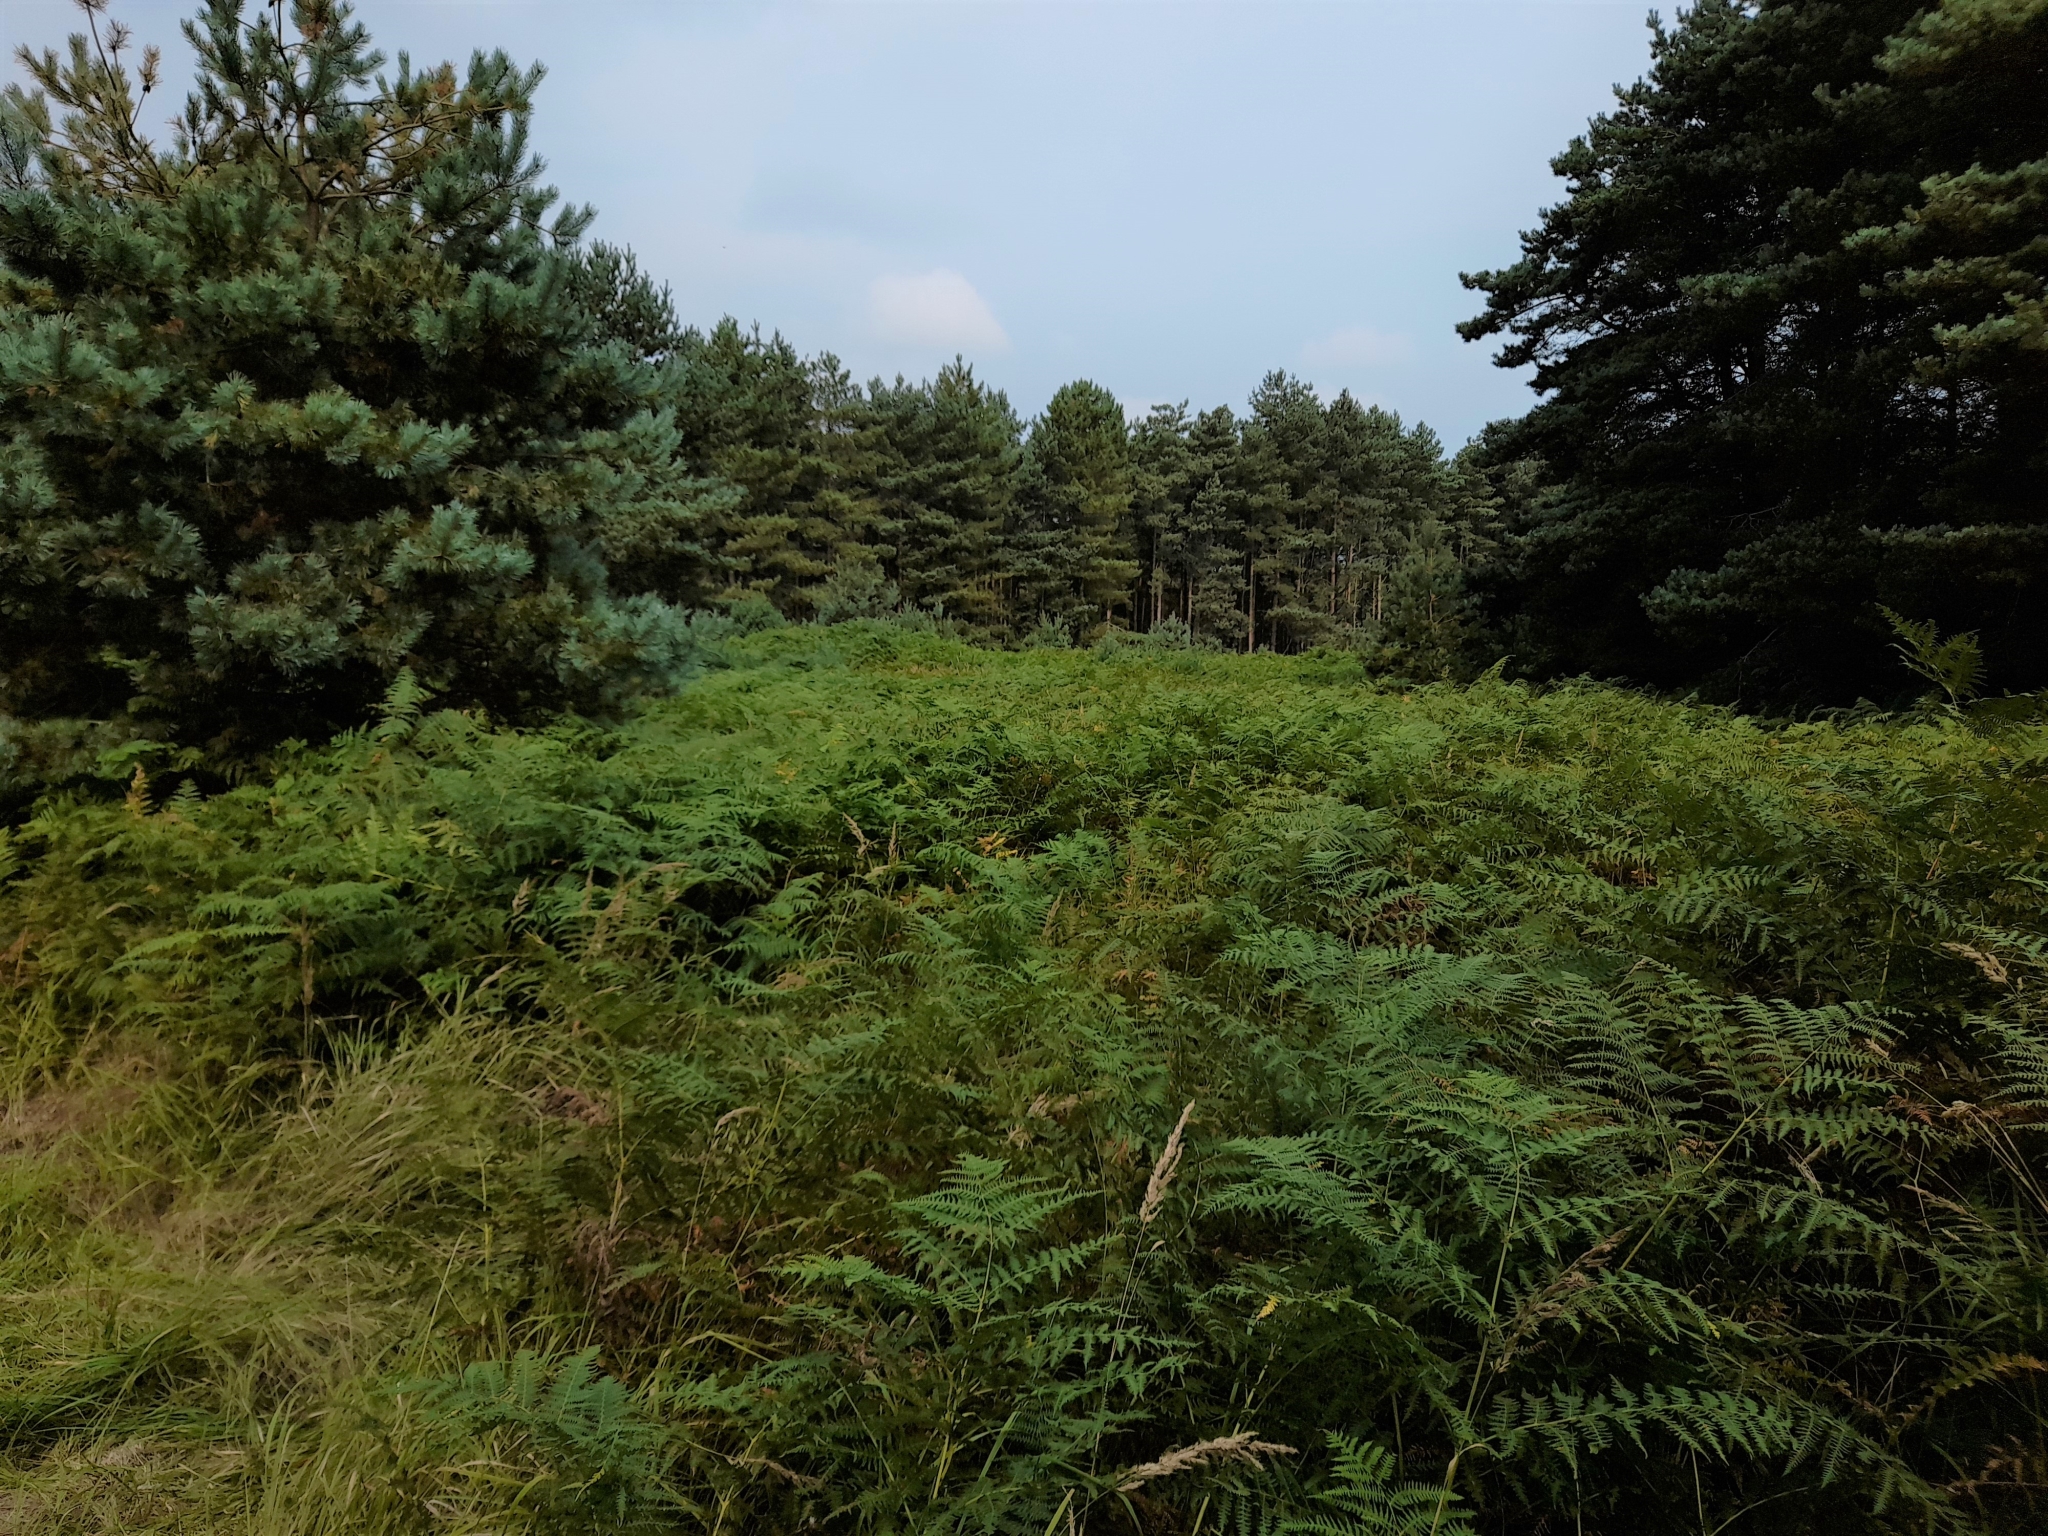 A photo from the FoTF Conservation Event - September 2021 - Brash Clearance at the Goshwak Trail : Looking out from the Goshawk Trail into a large patch of Bracken